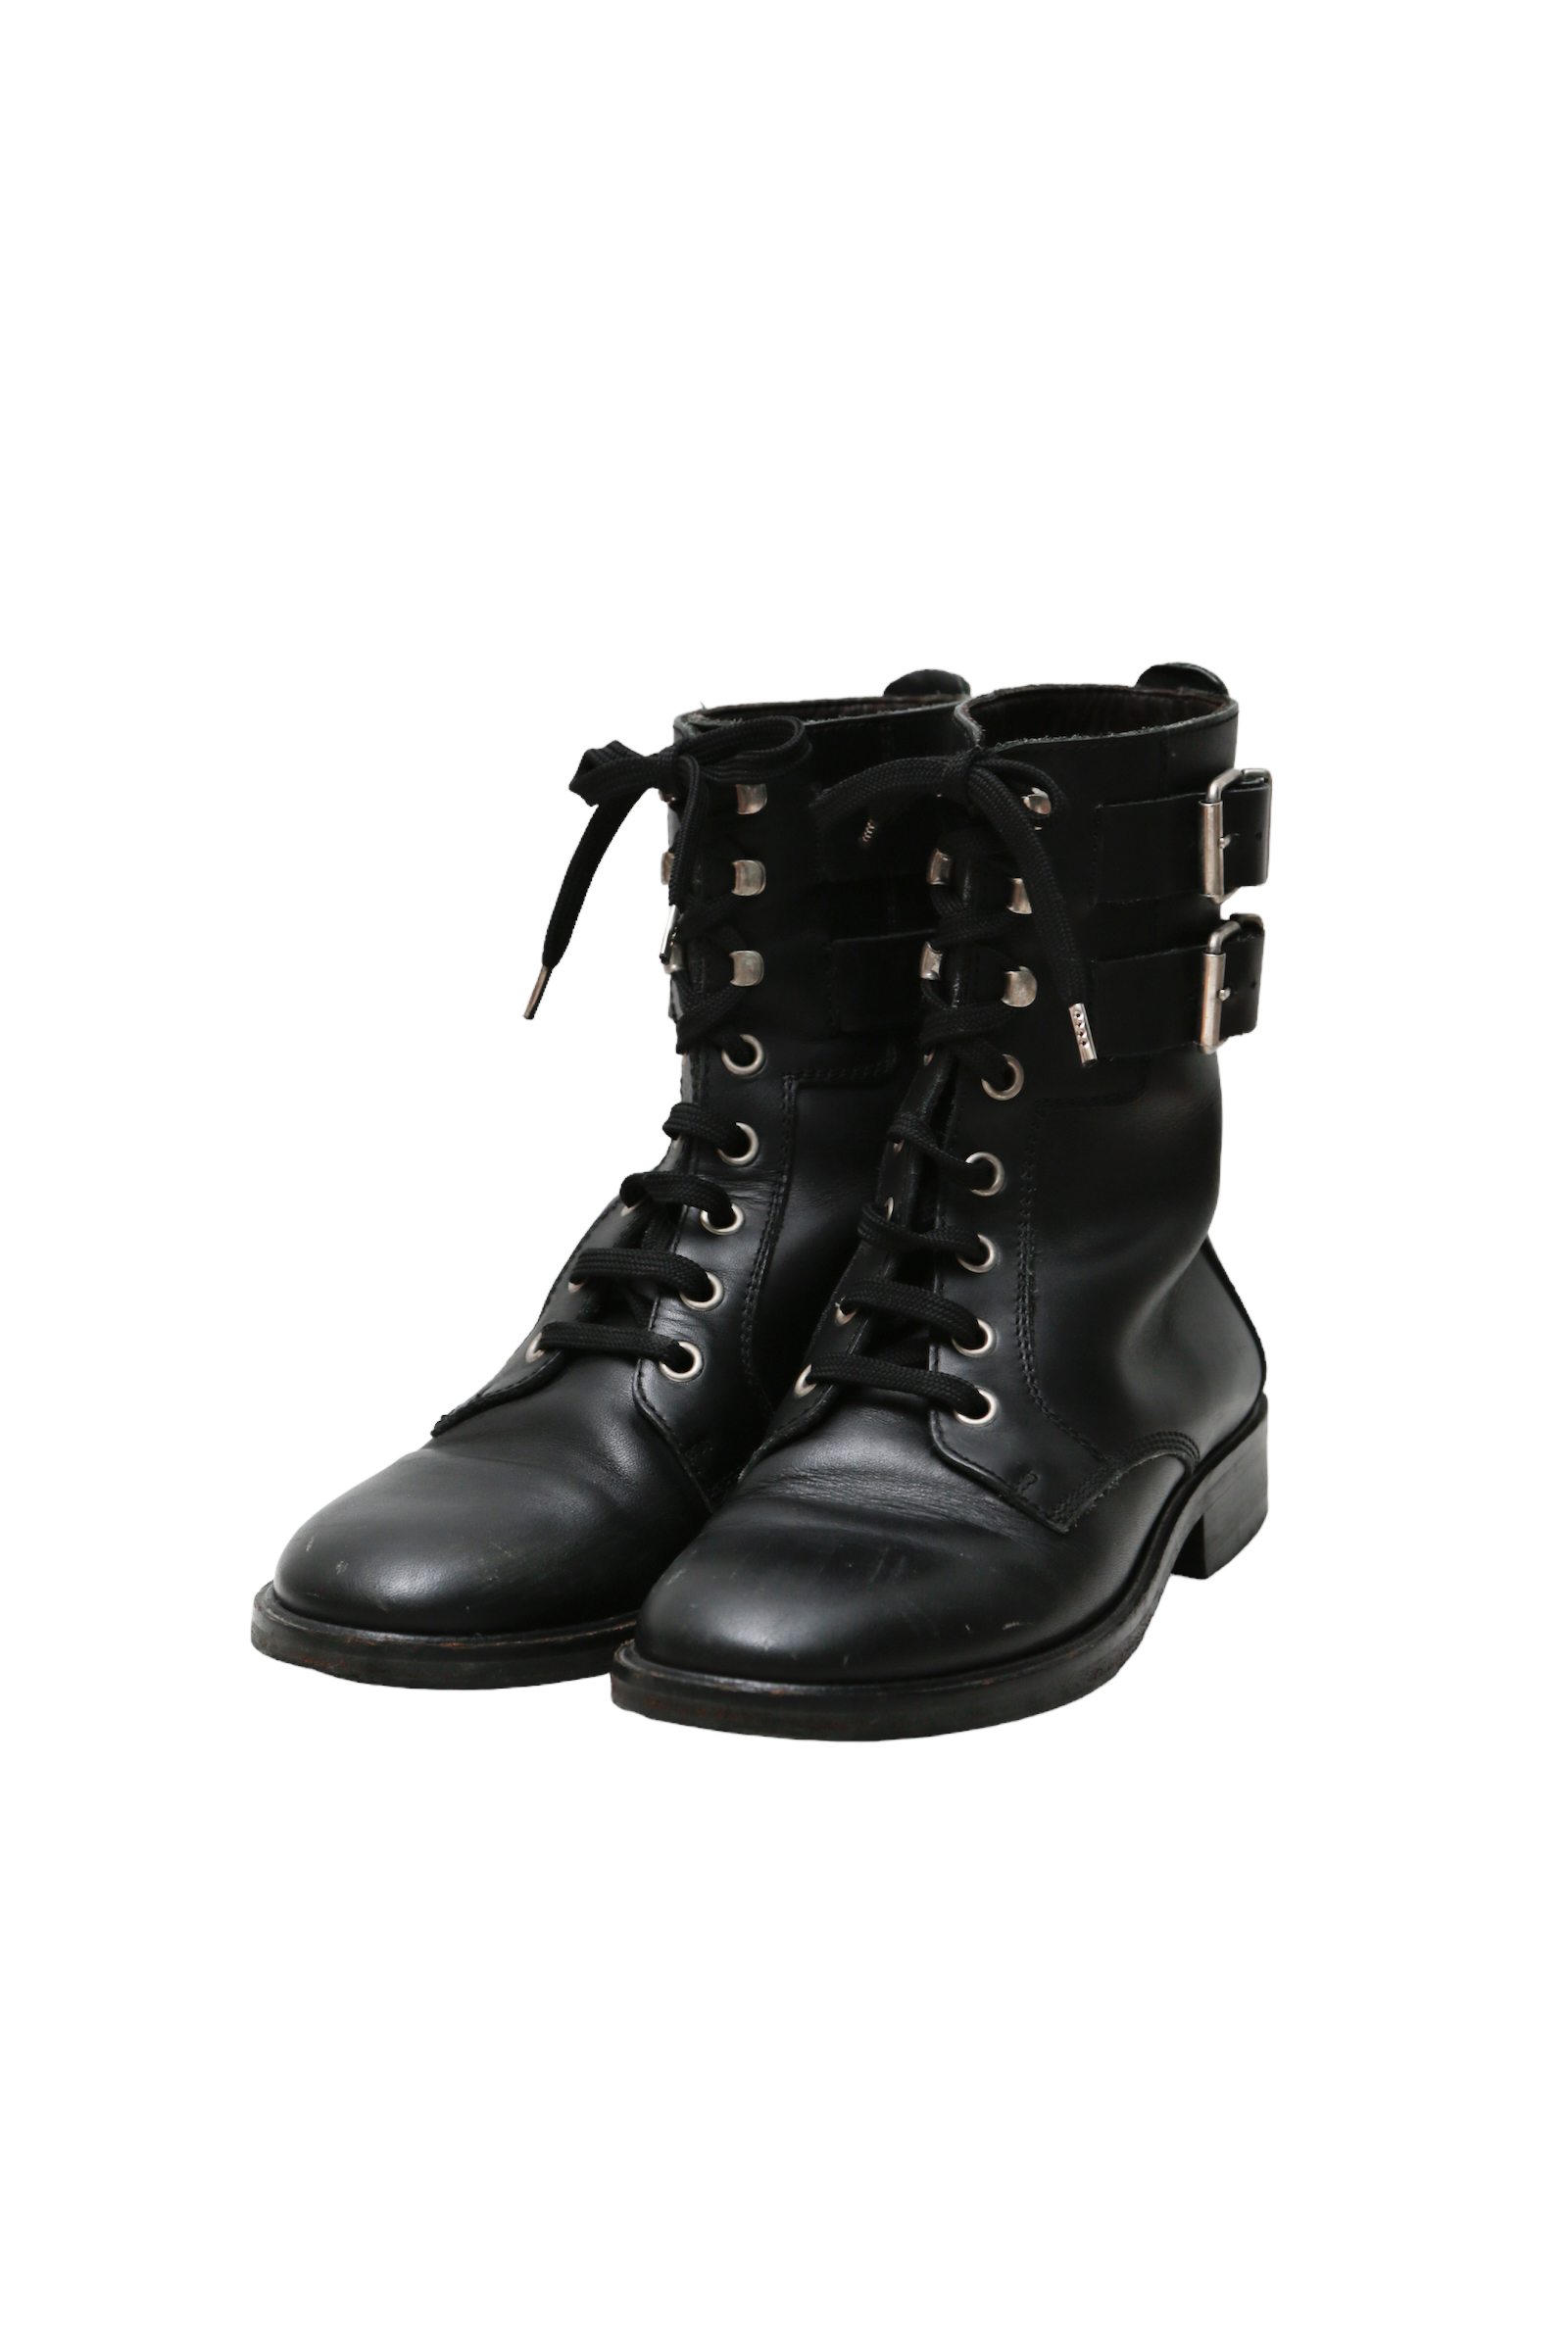 2007AW RAF SIMONS LACE UP LEATHER BOOTS